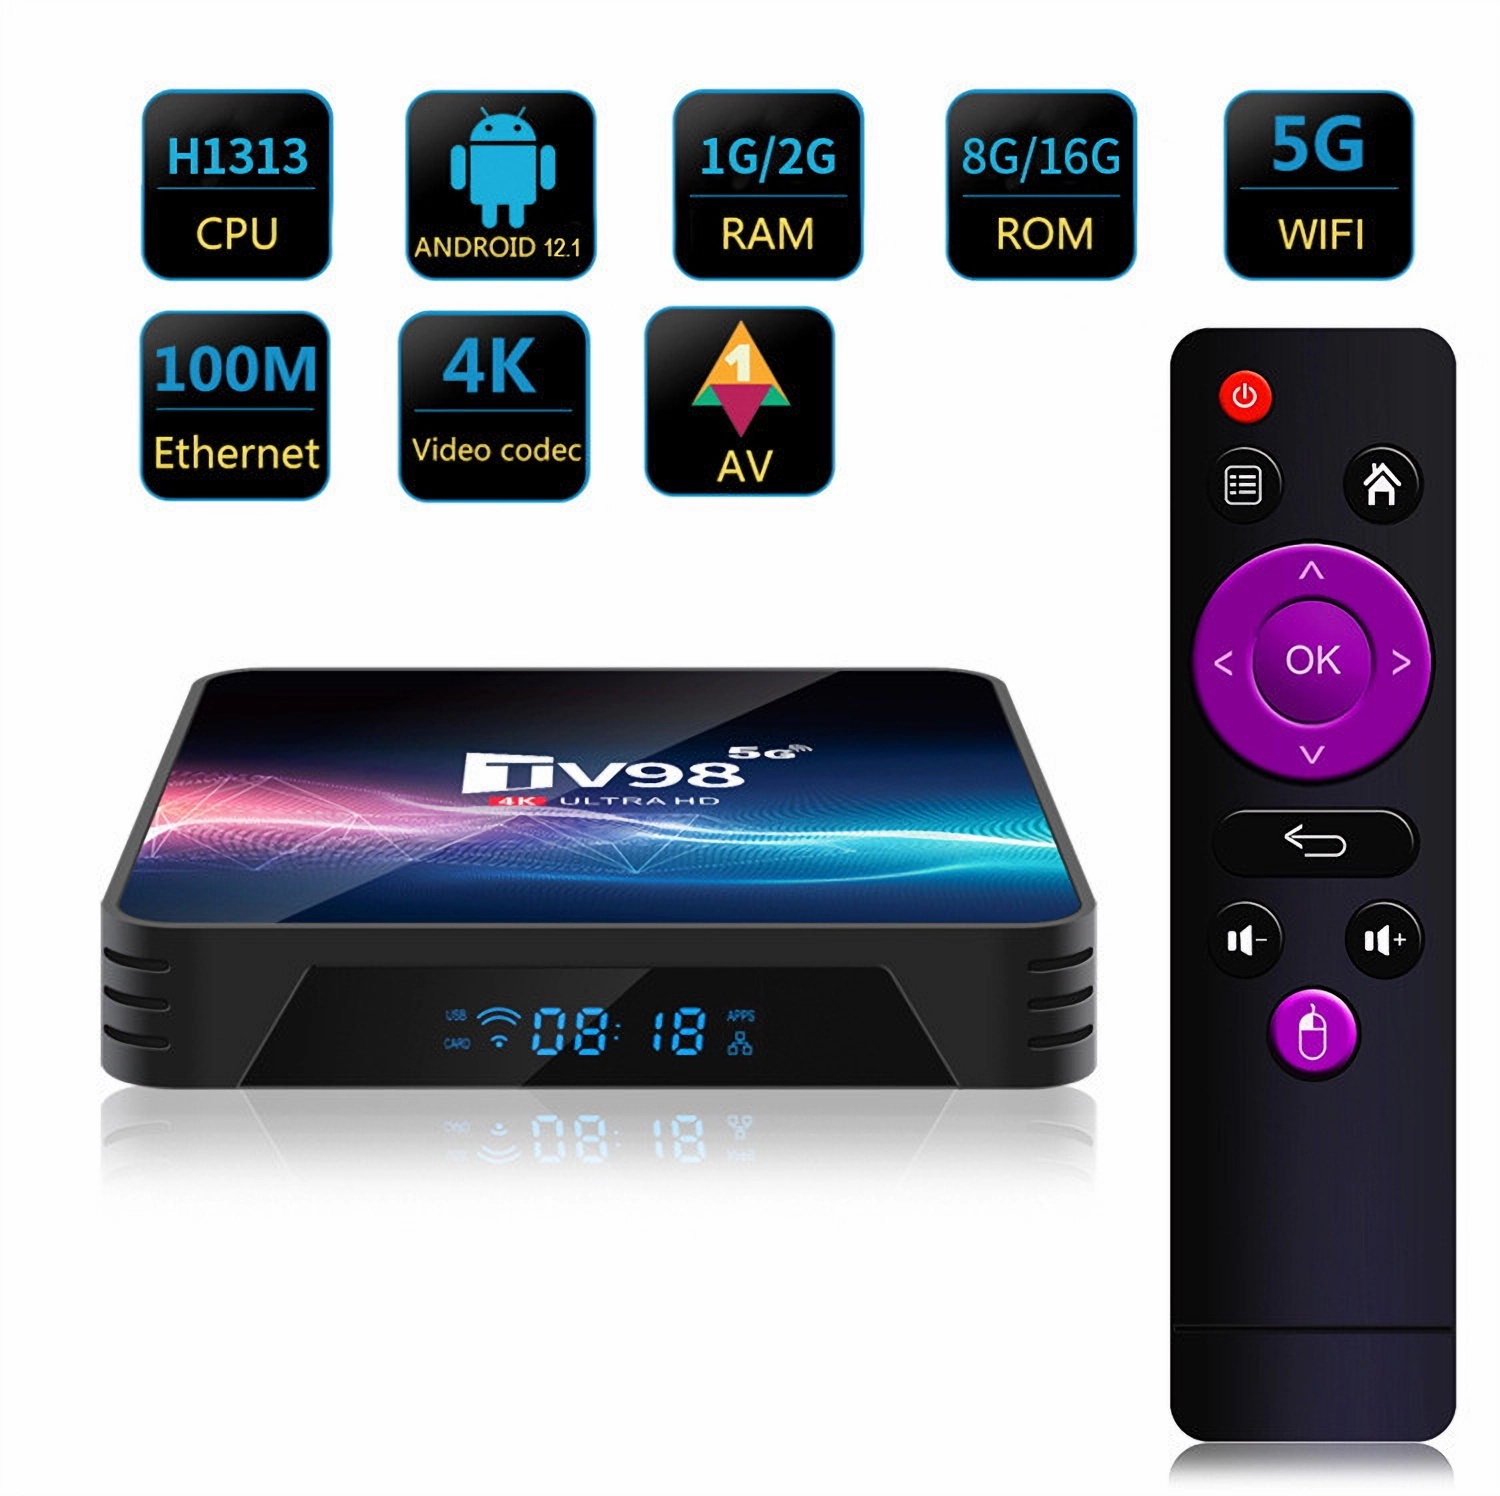 BRIGHTAKE Ultimative Box - 2GB+16GB Box Dual-Band WiFi, Android TV Android 4K TV